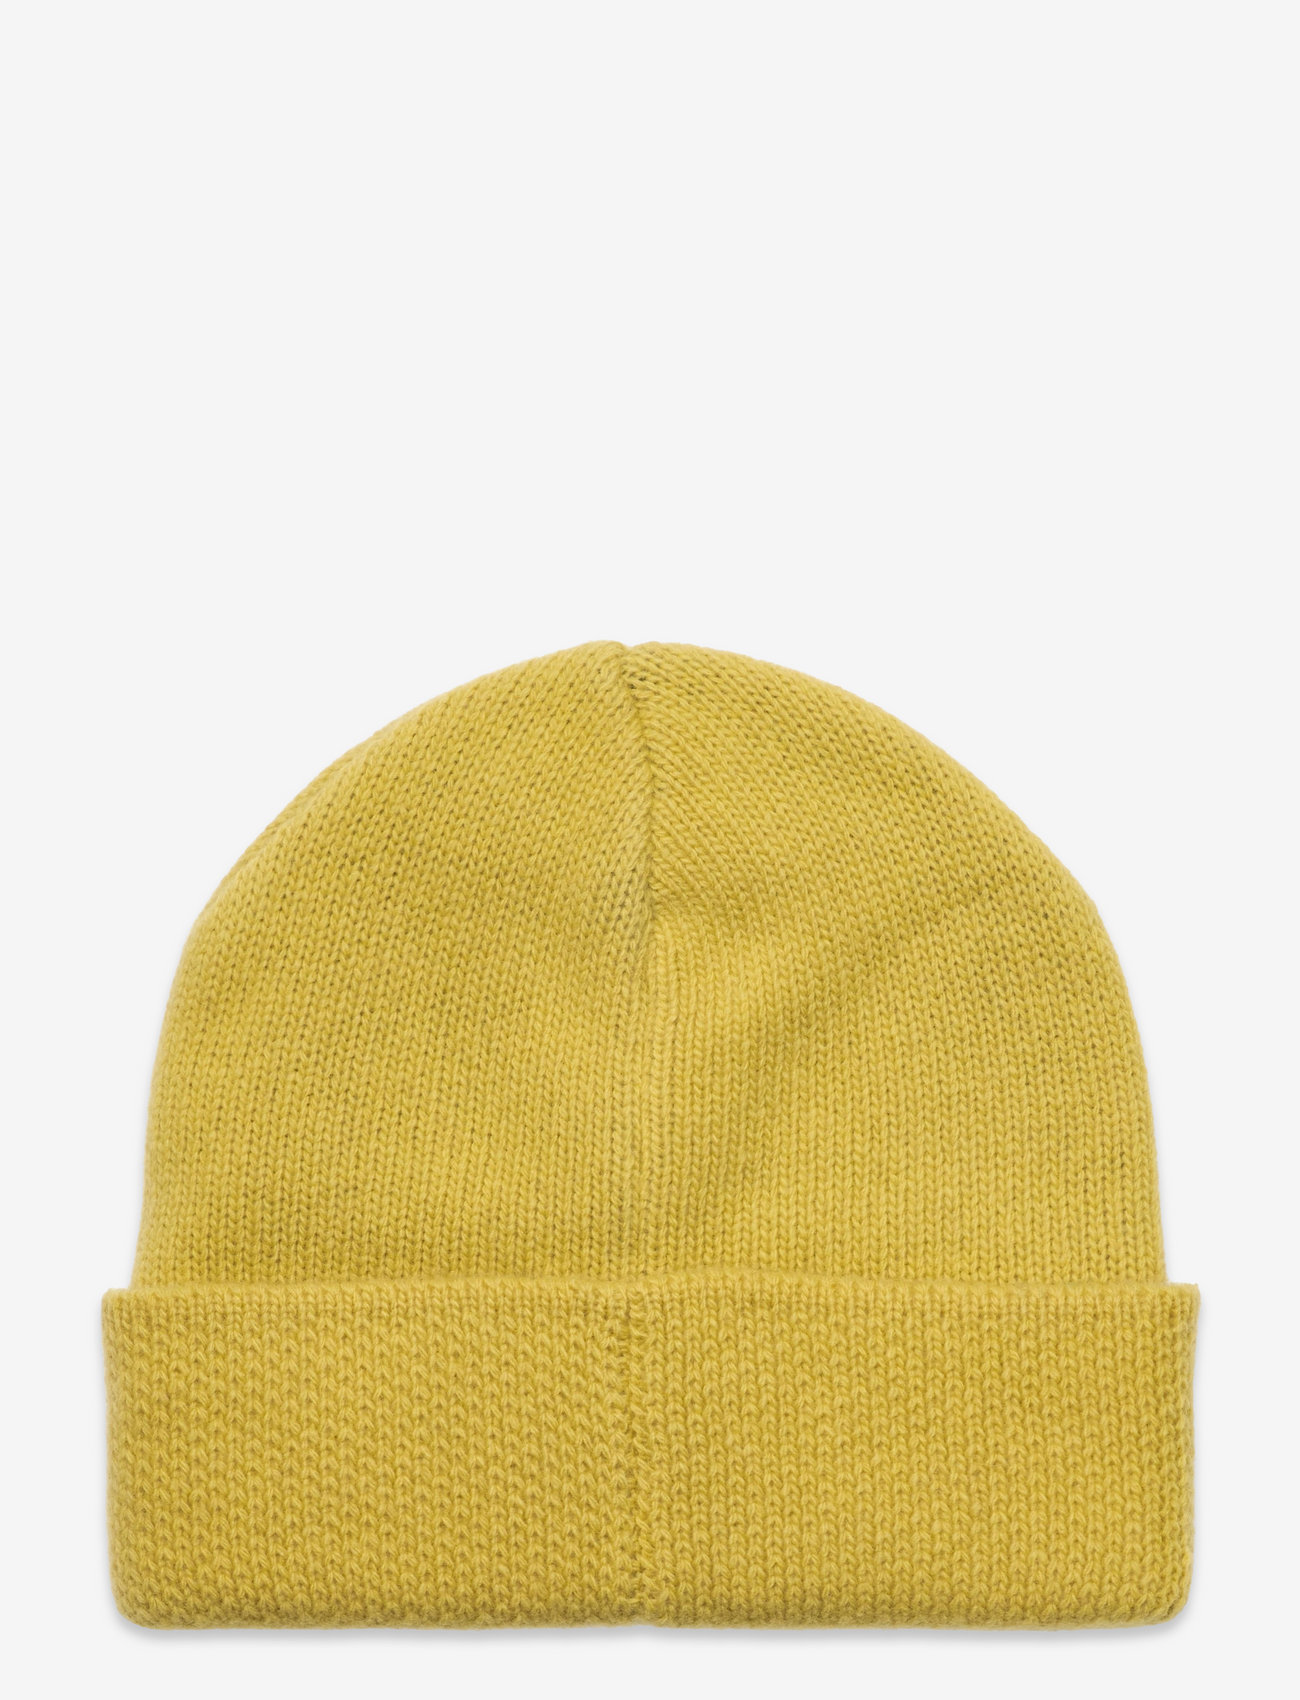 Double A by Wood Wood - Vin Jacquard beanie - beanies - gold dust - 1